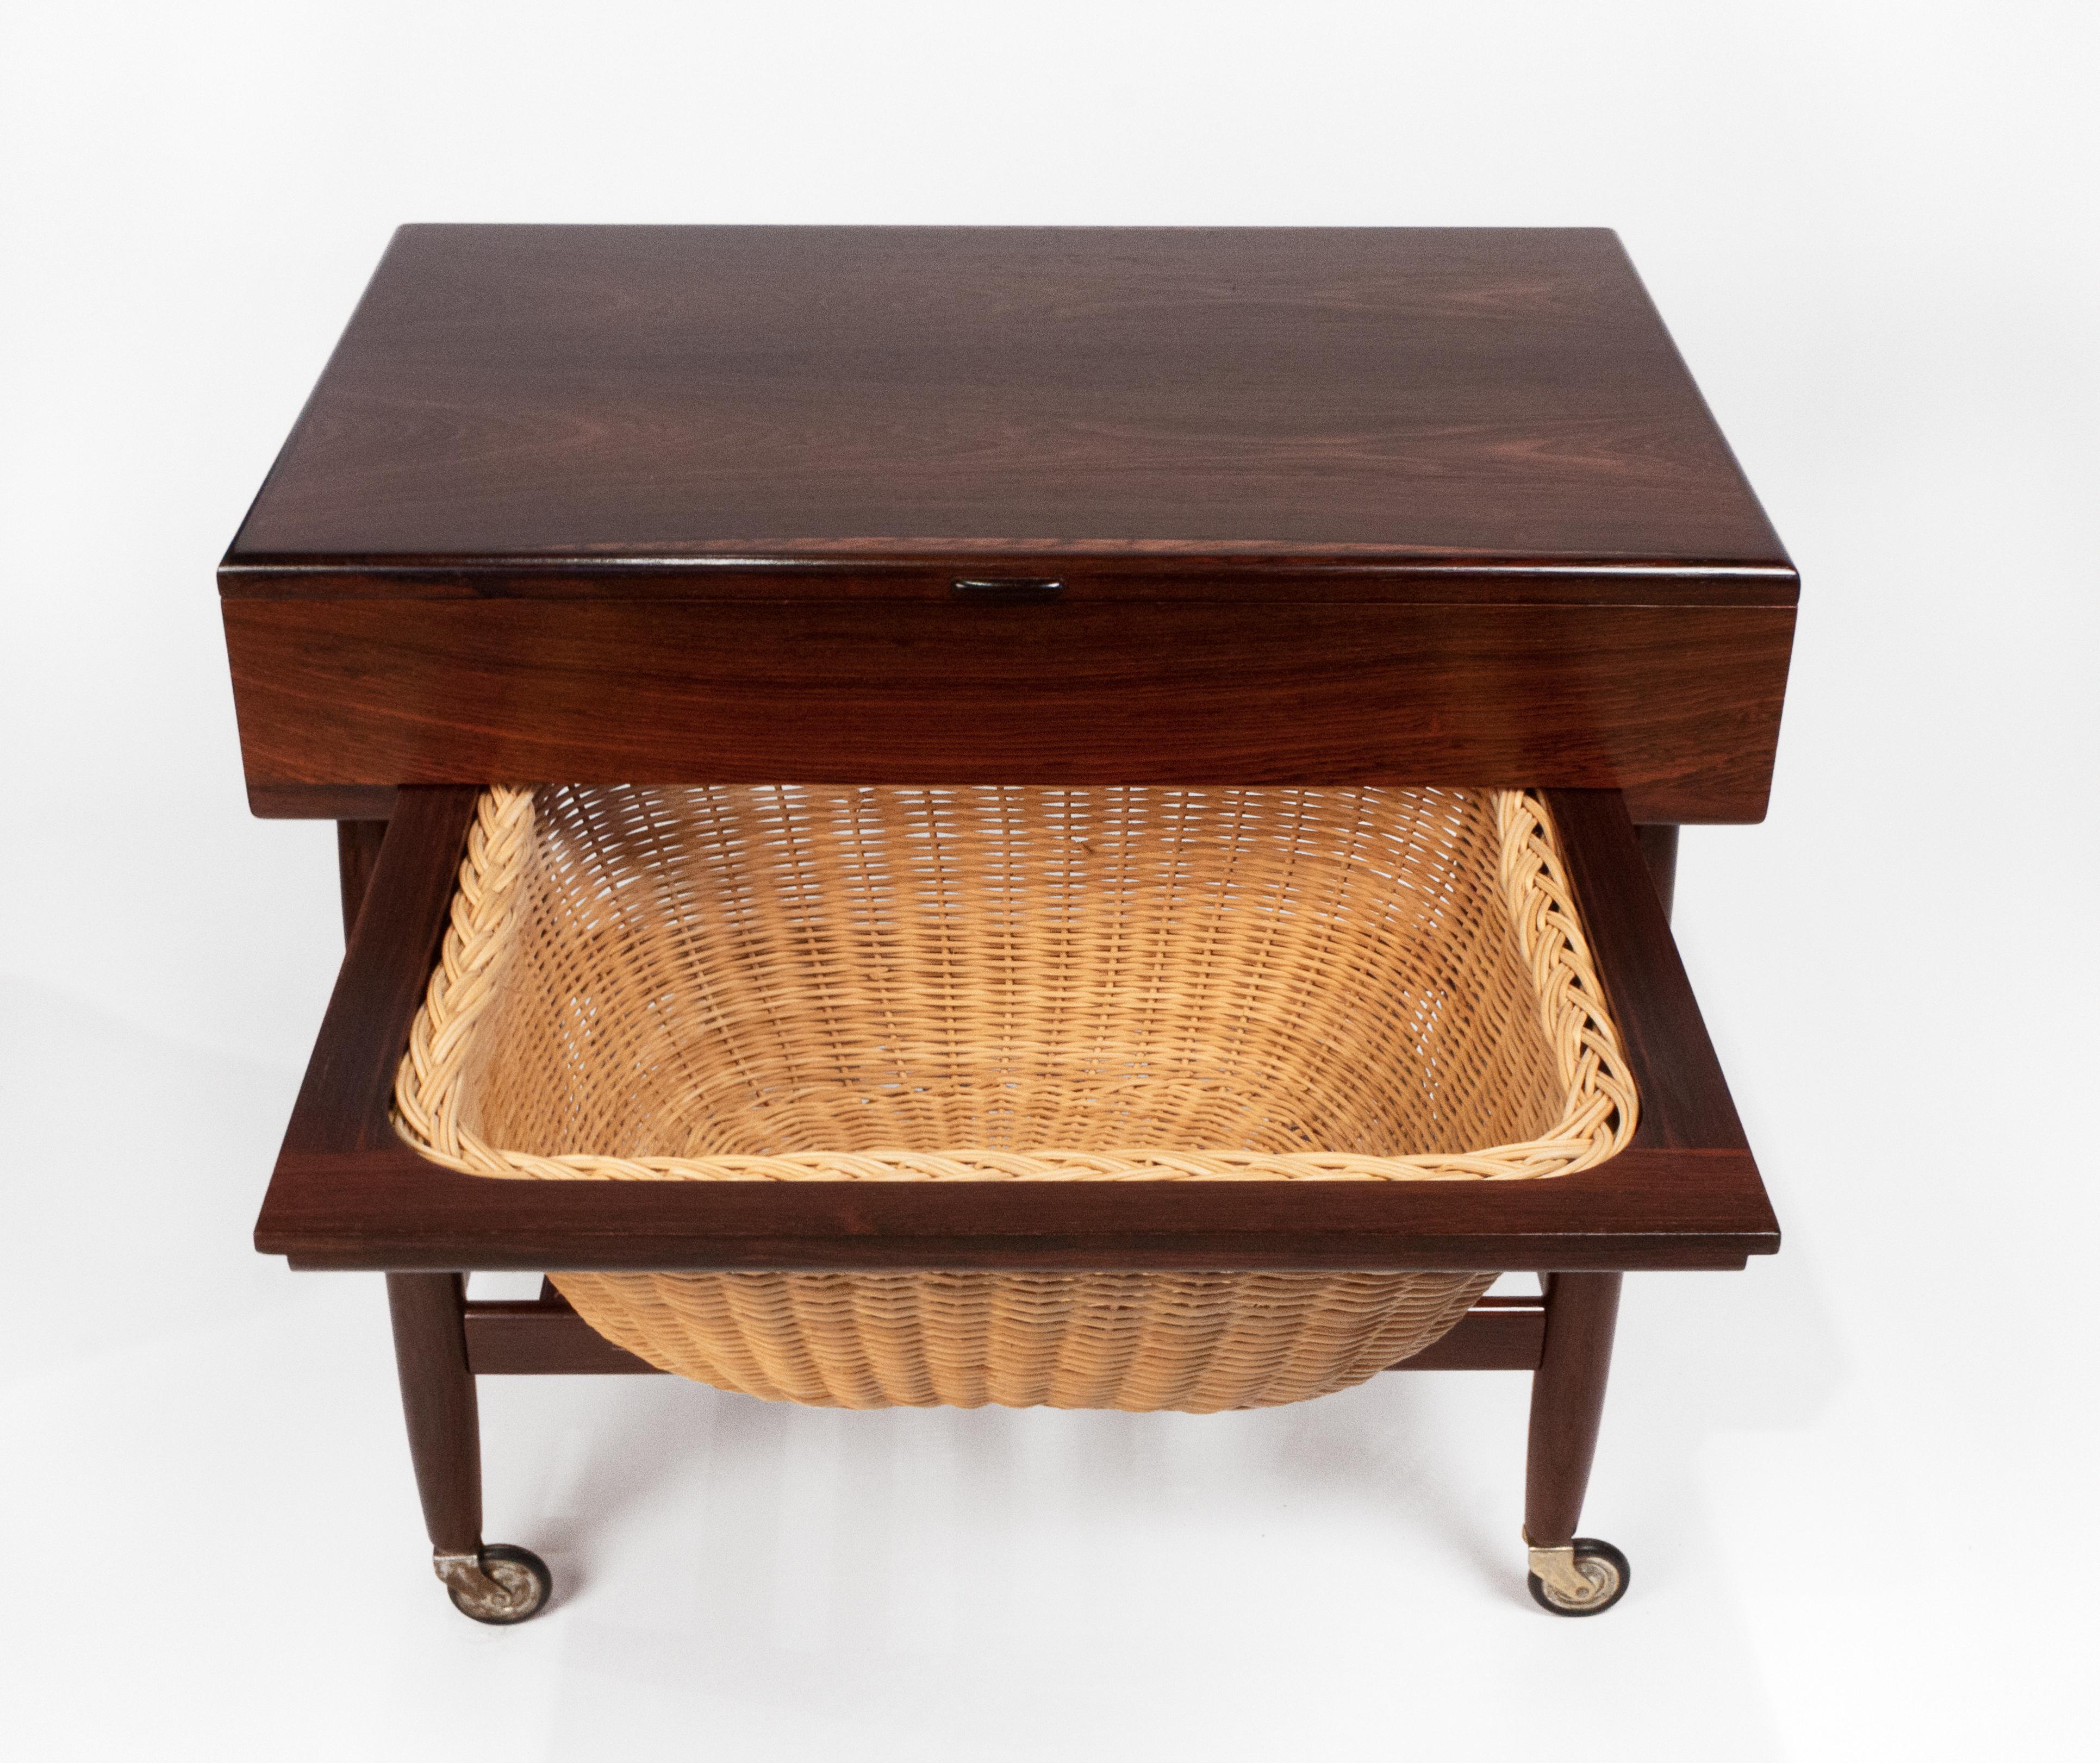 Ejvind Johansson Rosewood Sewing Cabinet with Wicker Basket Danish Modern In Good Condition For Sale In Dallas, TX